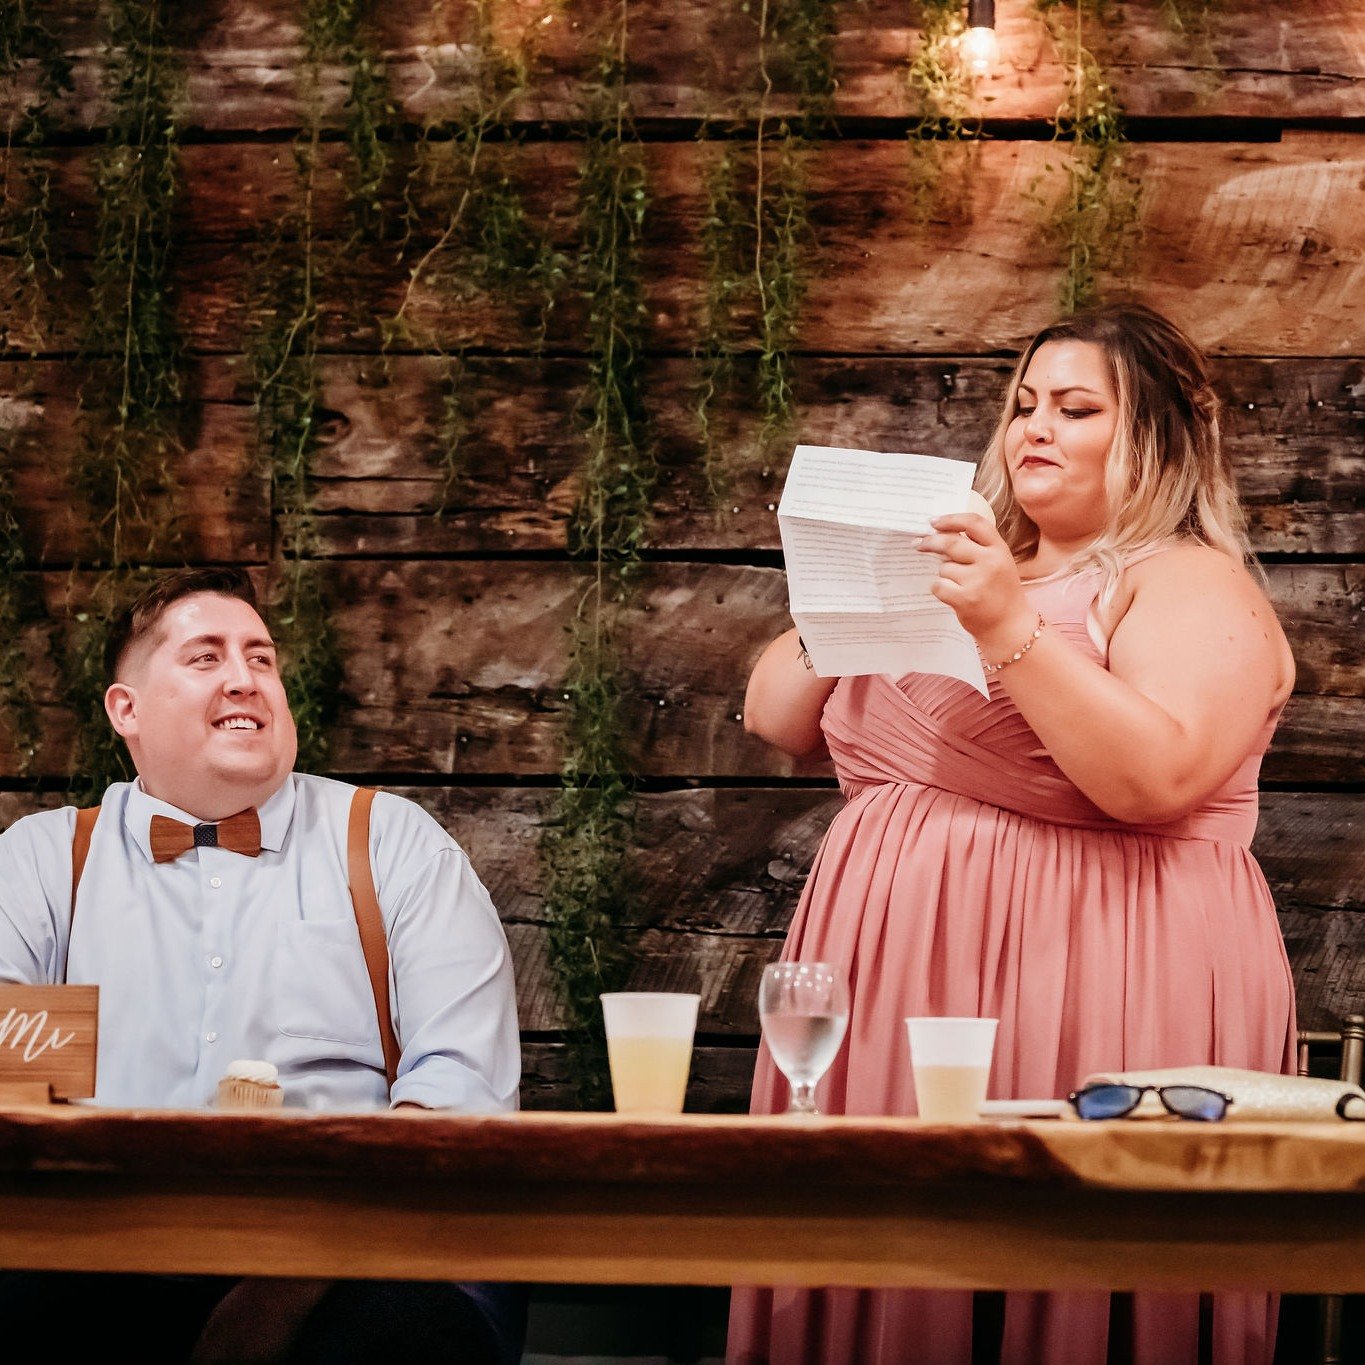 Want more dance floor time on your big day? 🎉💃🕺 Cut down on speeches and keep it short and sweet! 🎤💕 Have your Maid of Honor, Best Man and parents give a heartfelt speech and get the party going! .Consider scheduling other speeches at your rehea